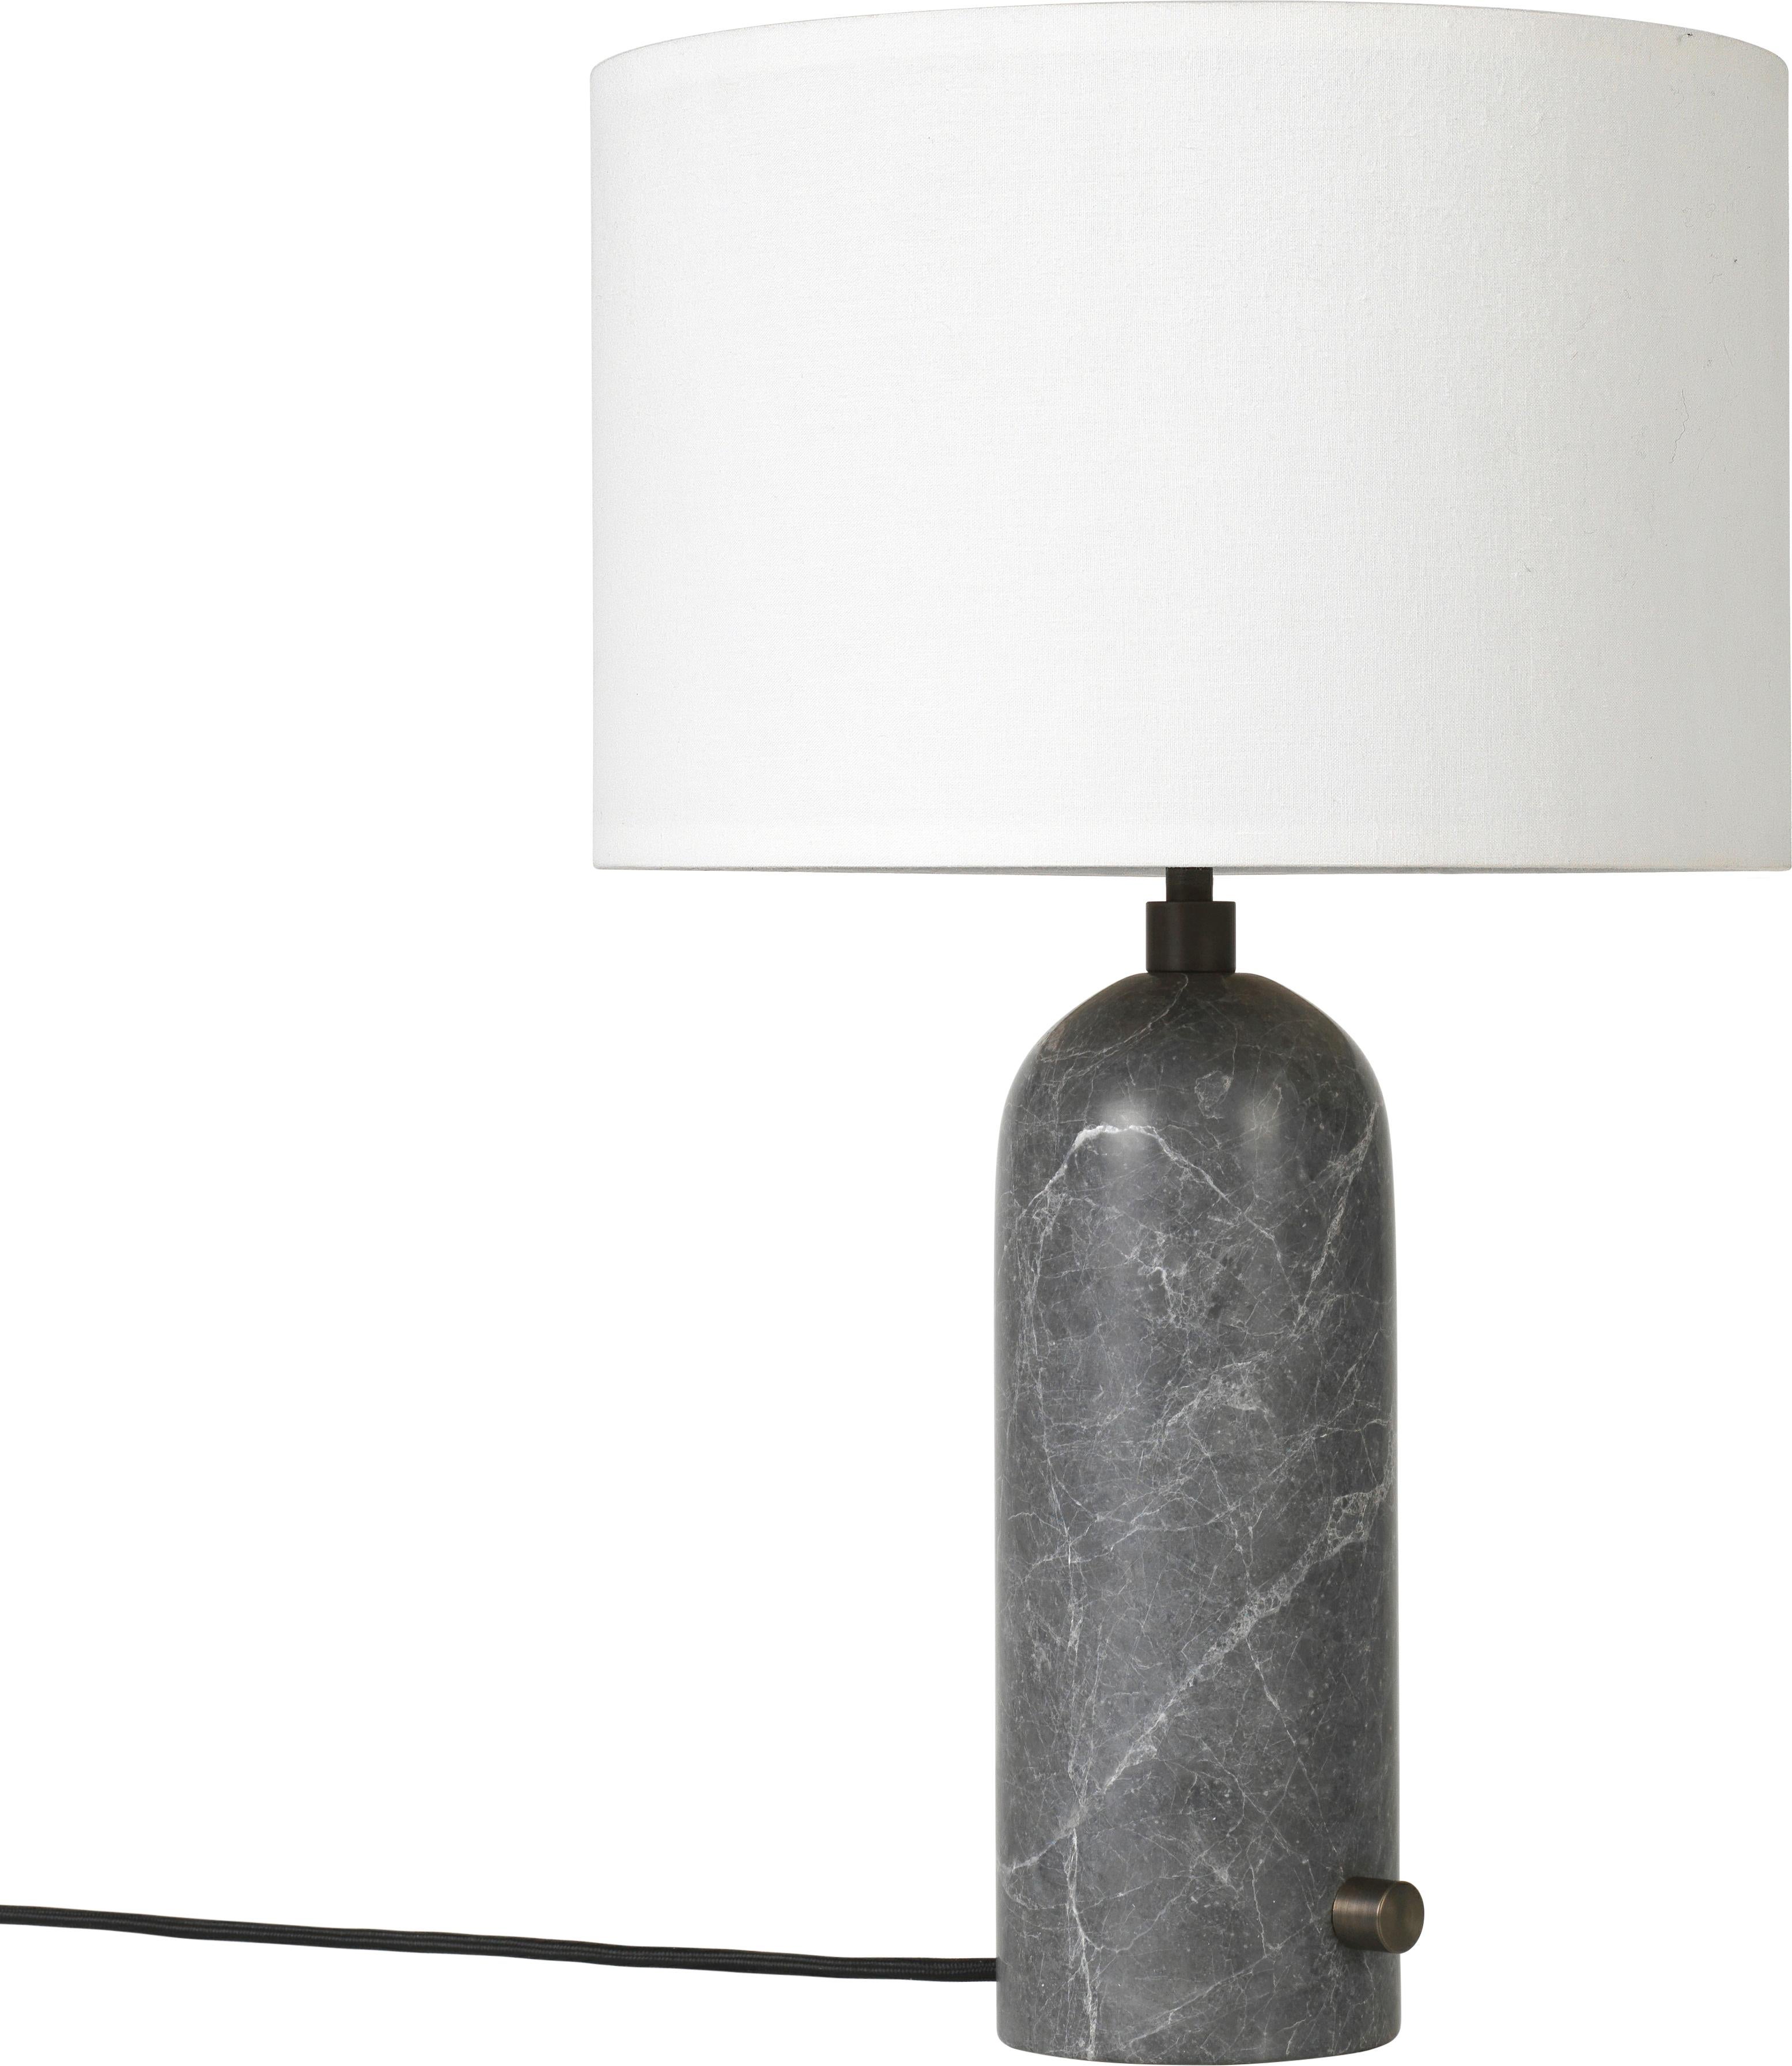 Large 'Gravity' marble table lamp by Space Copenhagen for Gubi in Gray.

Executed in solid marble with a canvas or white textile shade perched atop its stem, the Gravity table lamp designed by Space Copenhagen for GUBI contrasts strength and